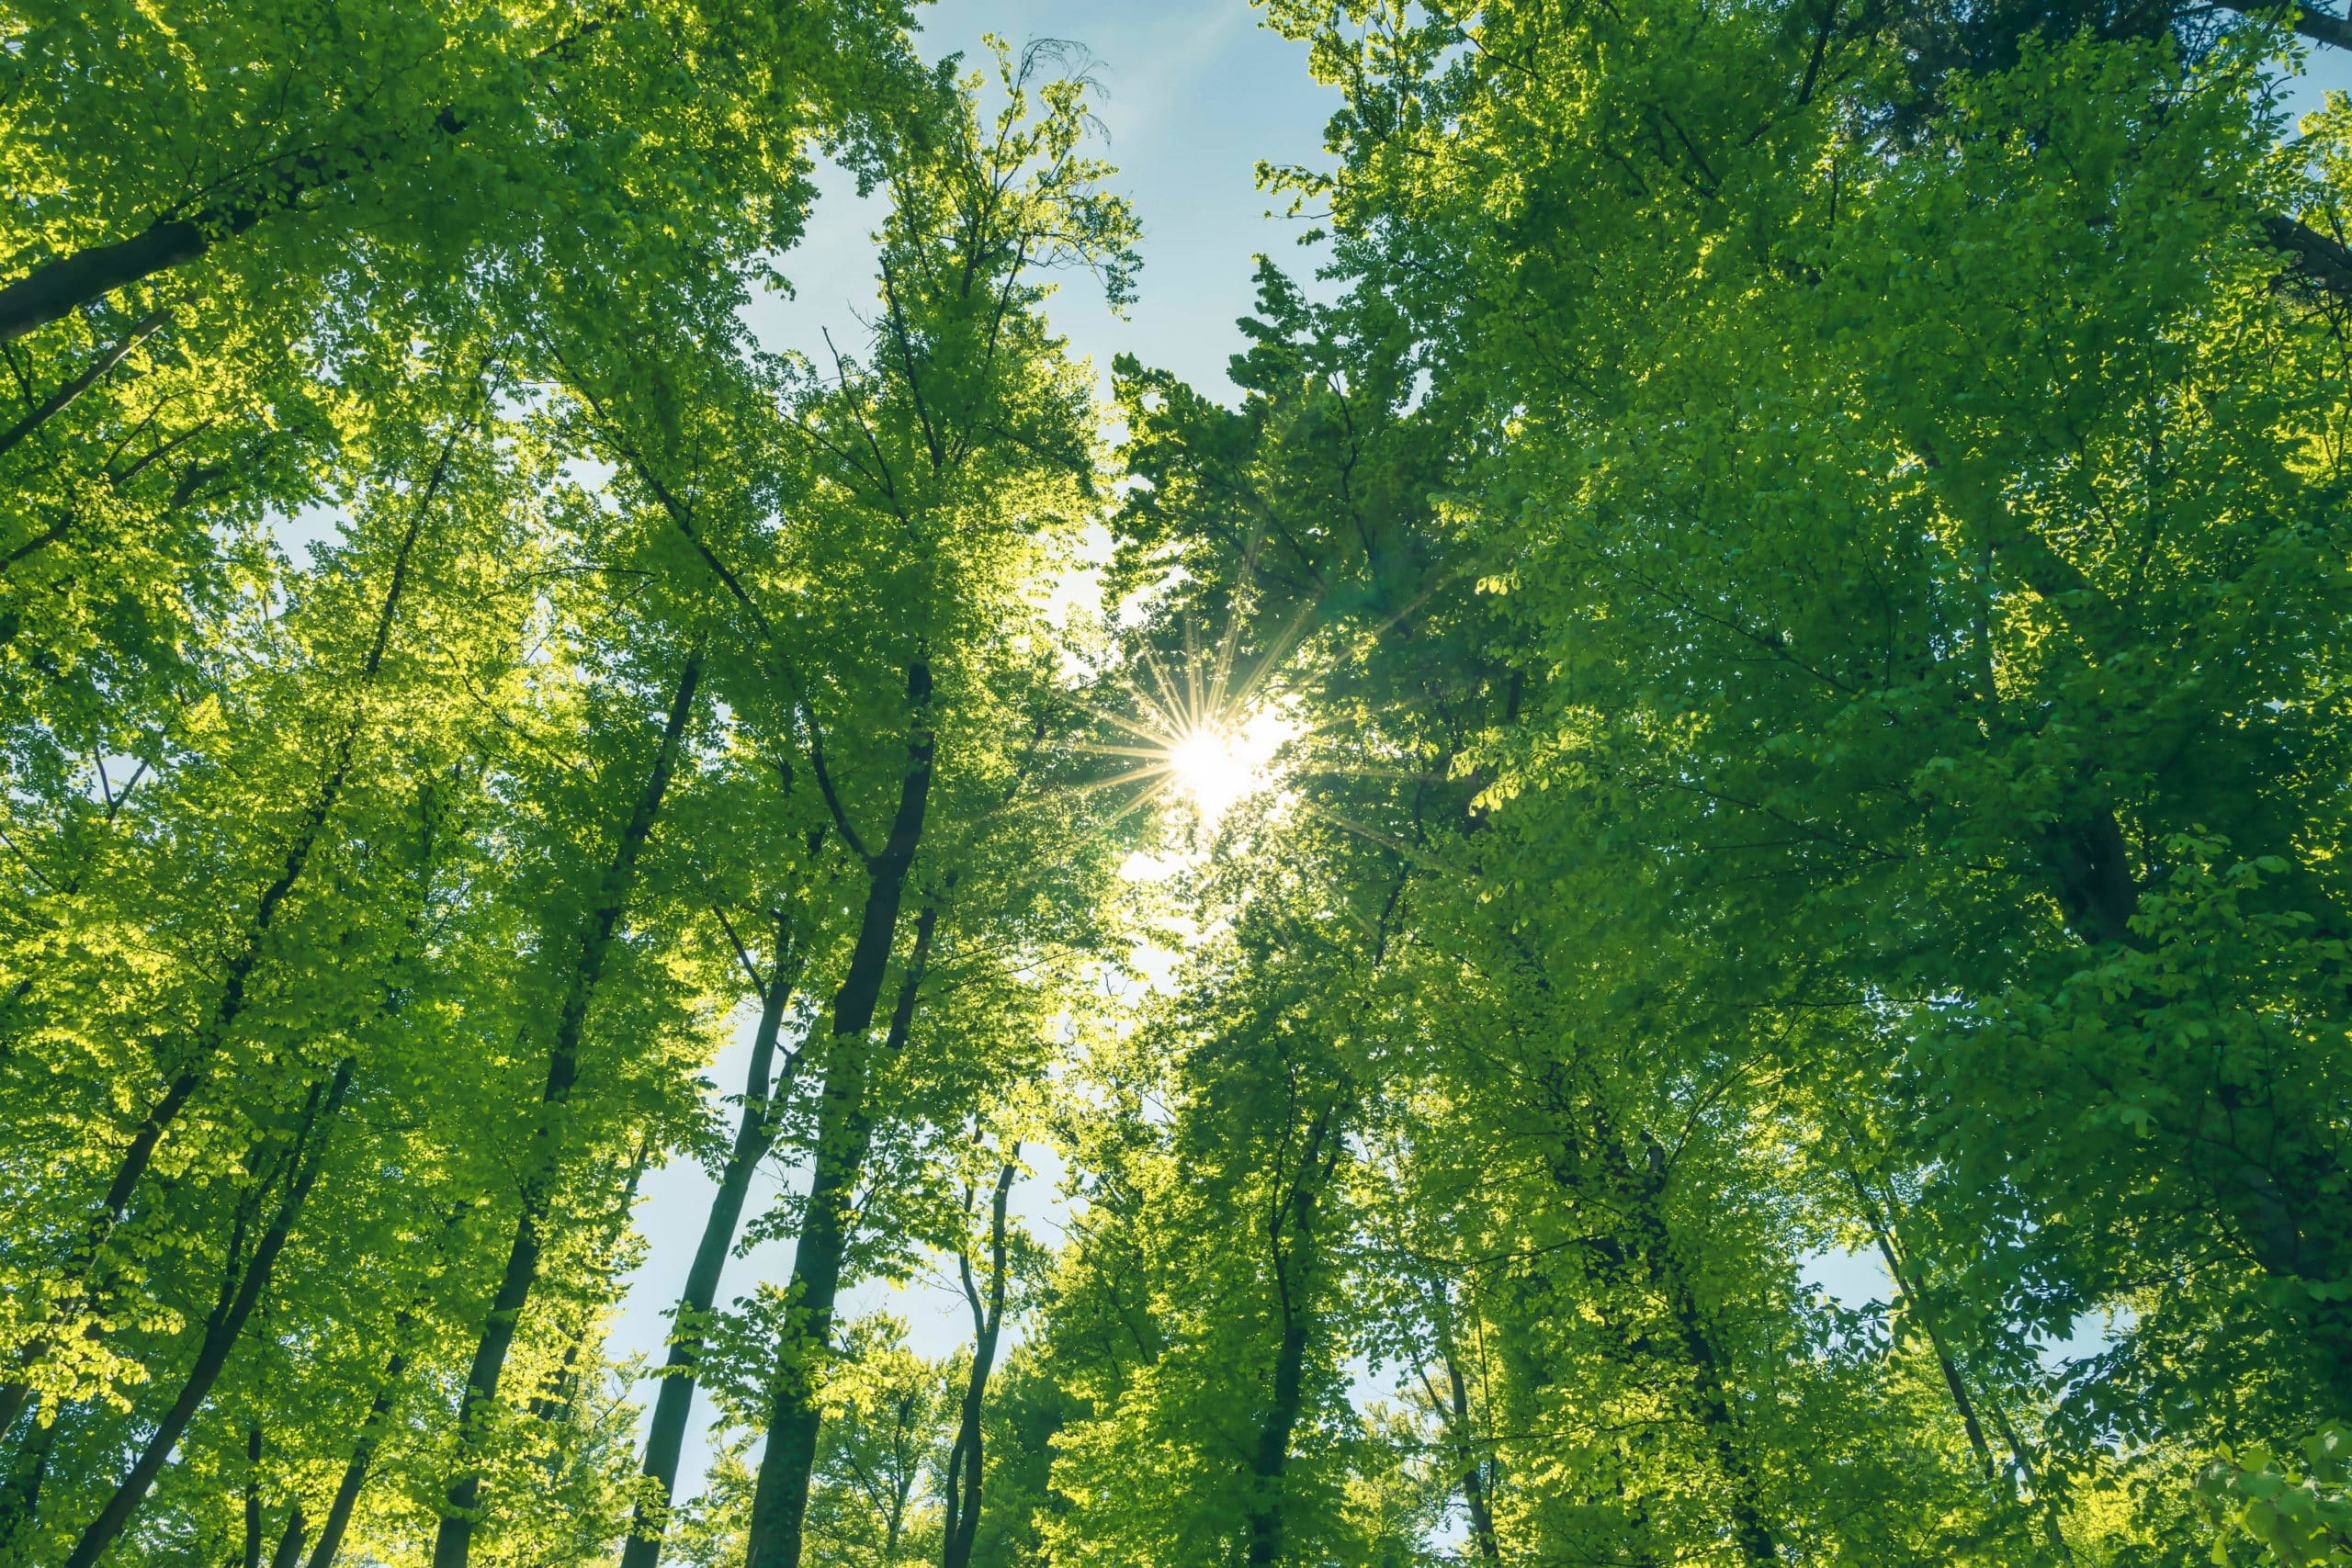 A beautiful view looking up at the tall trees with bright green leaves, set against a bright blue sky with the sun peeking through the branches and leaves, casting warm rays of sunlight.